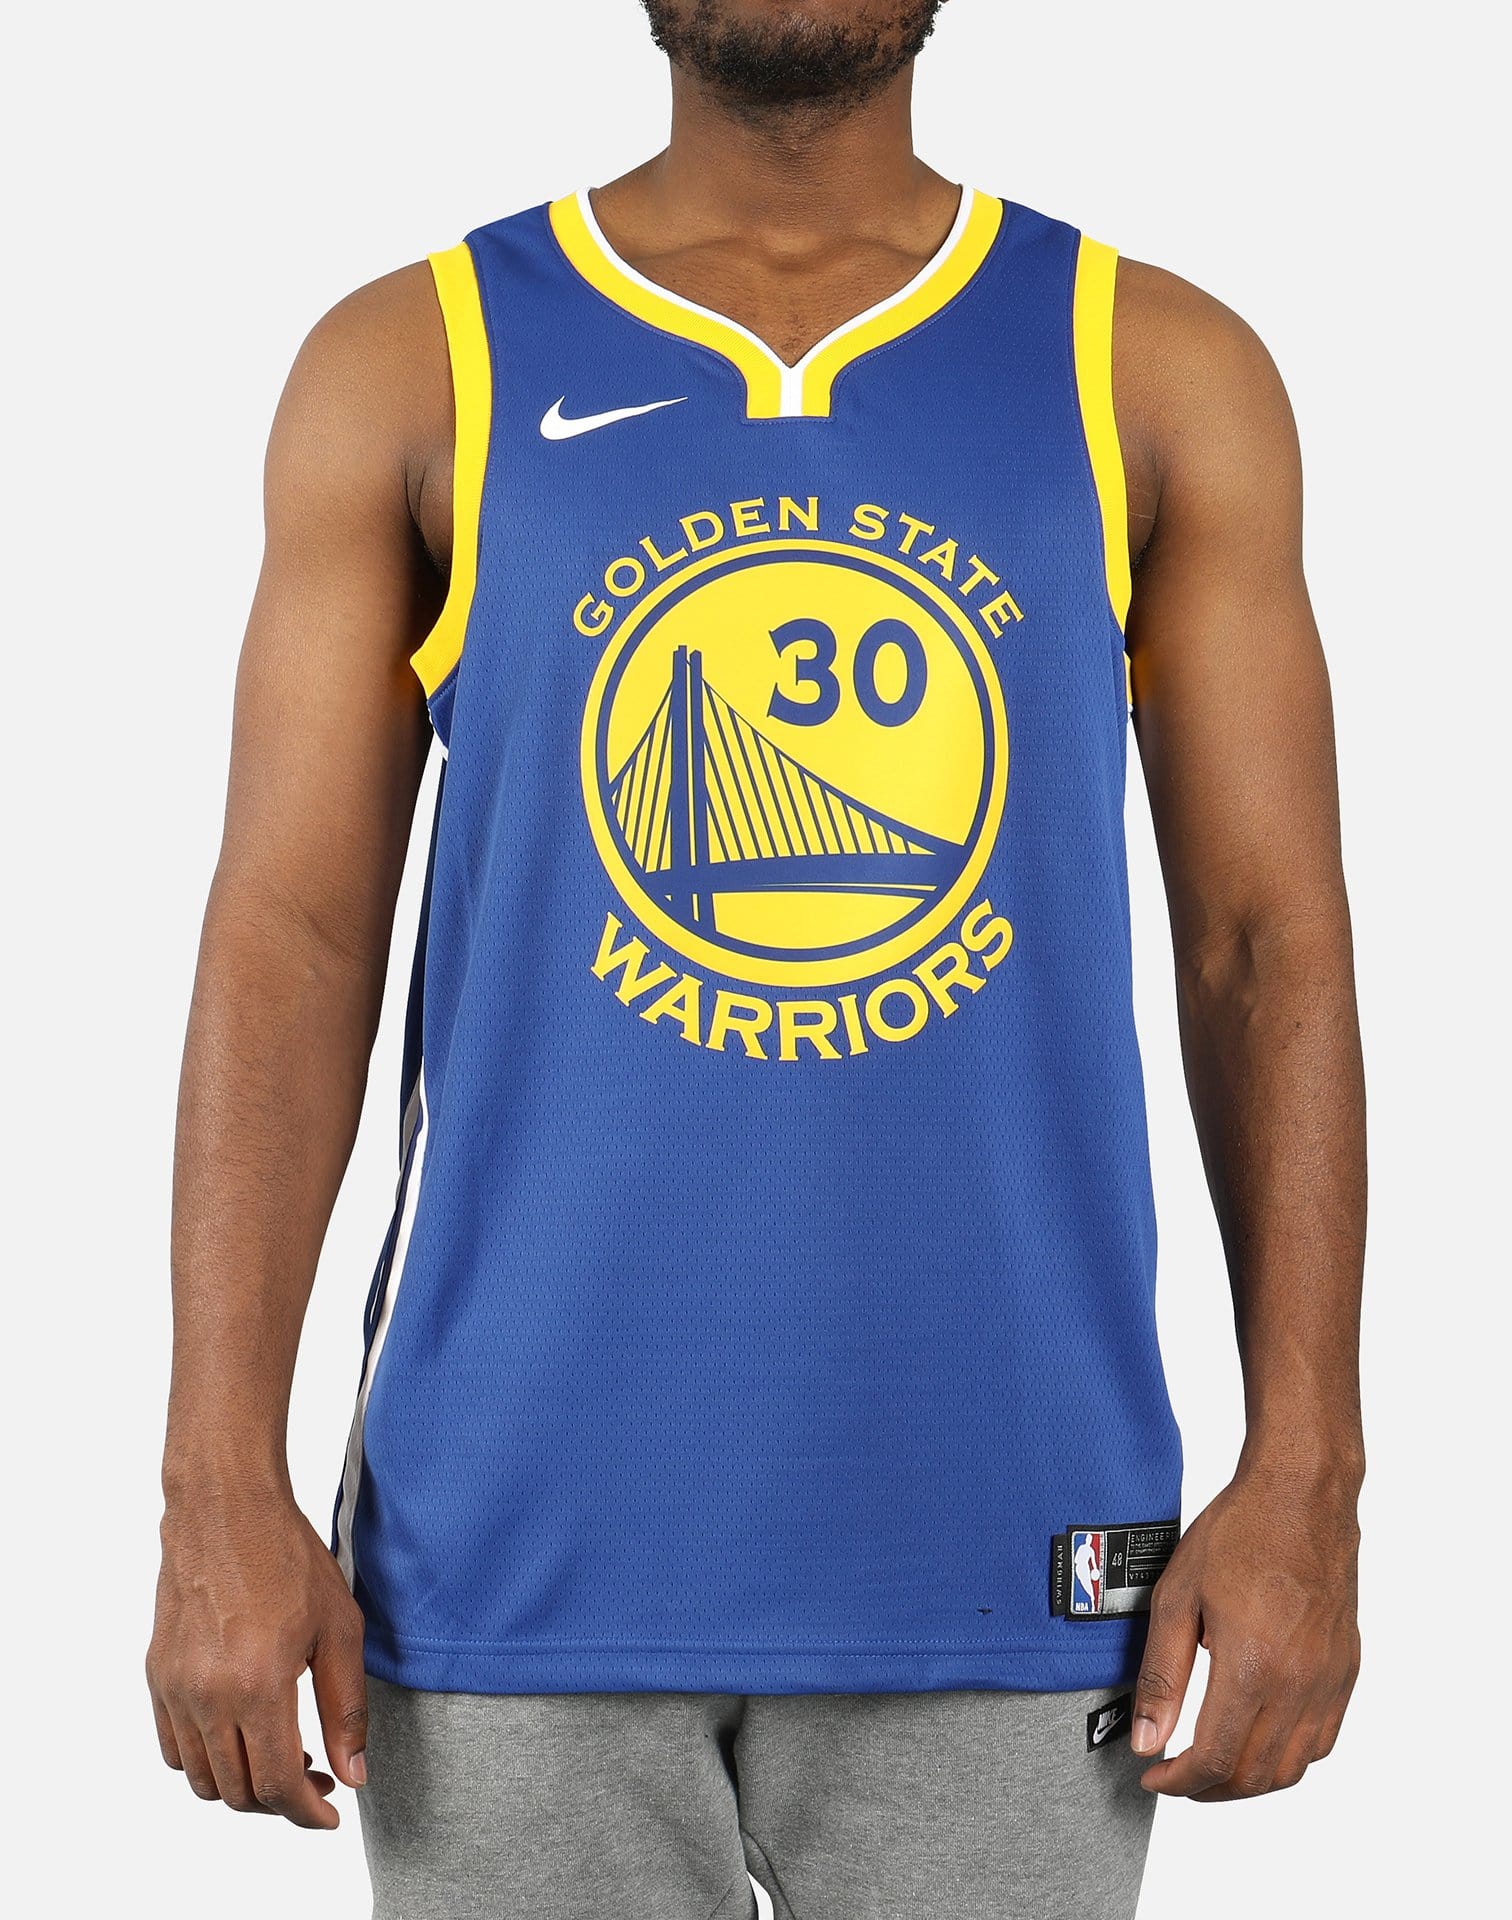 Stephen Curry Warriors Association Edition Nike NBA Authentic Jersey.